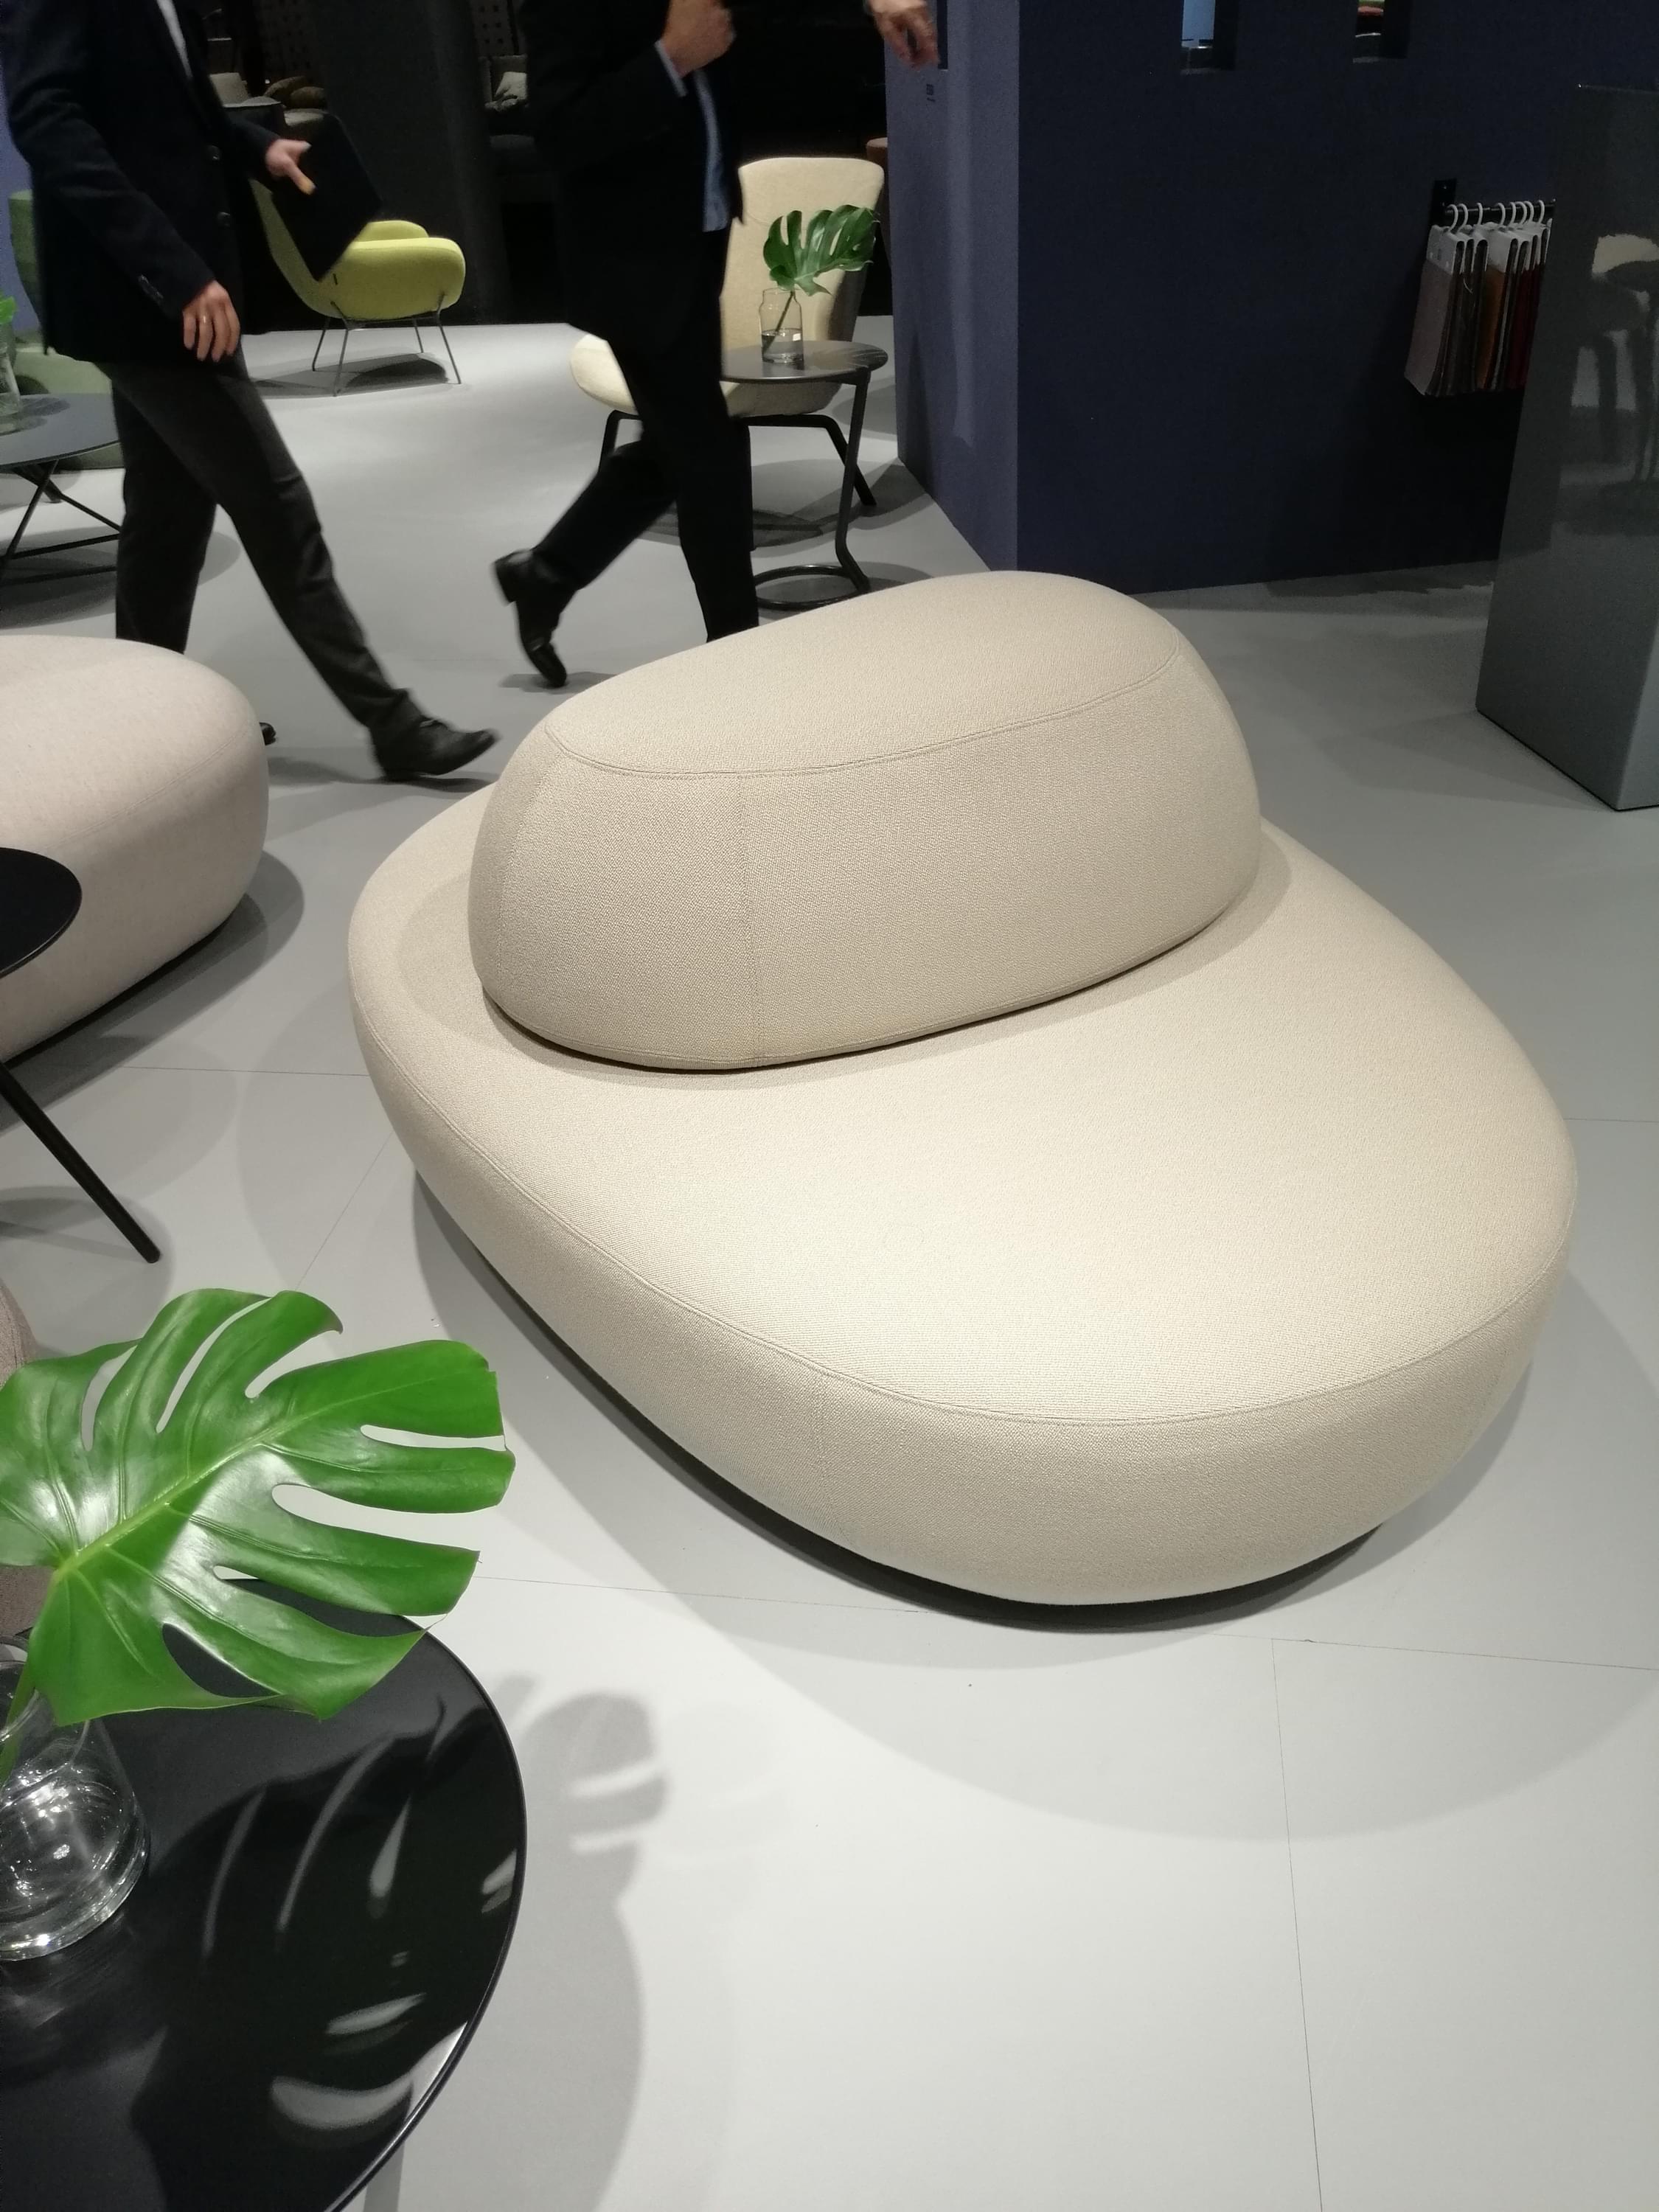 IMM-Cologne-modular-bench-contemporary-office-furniture.jpg#asset:180253